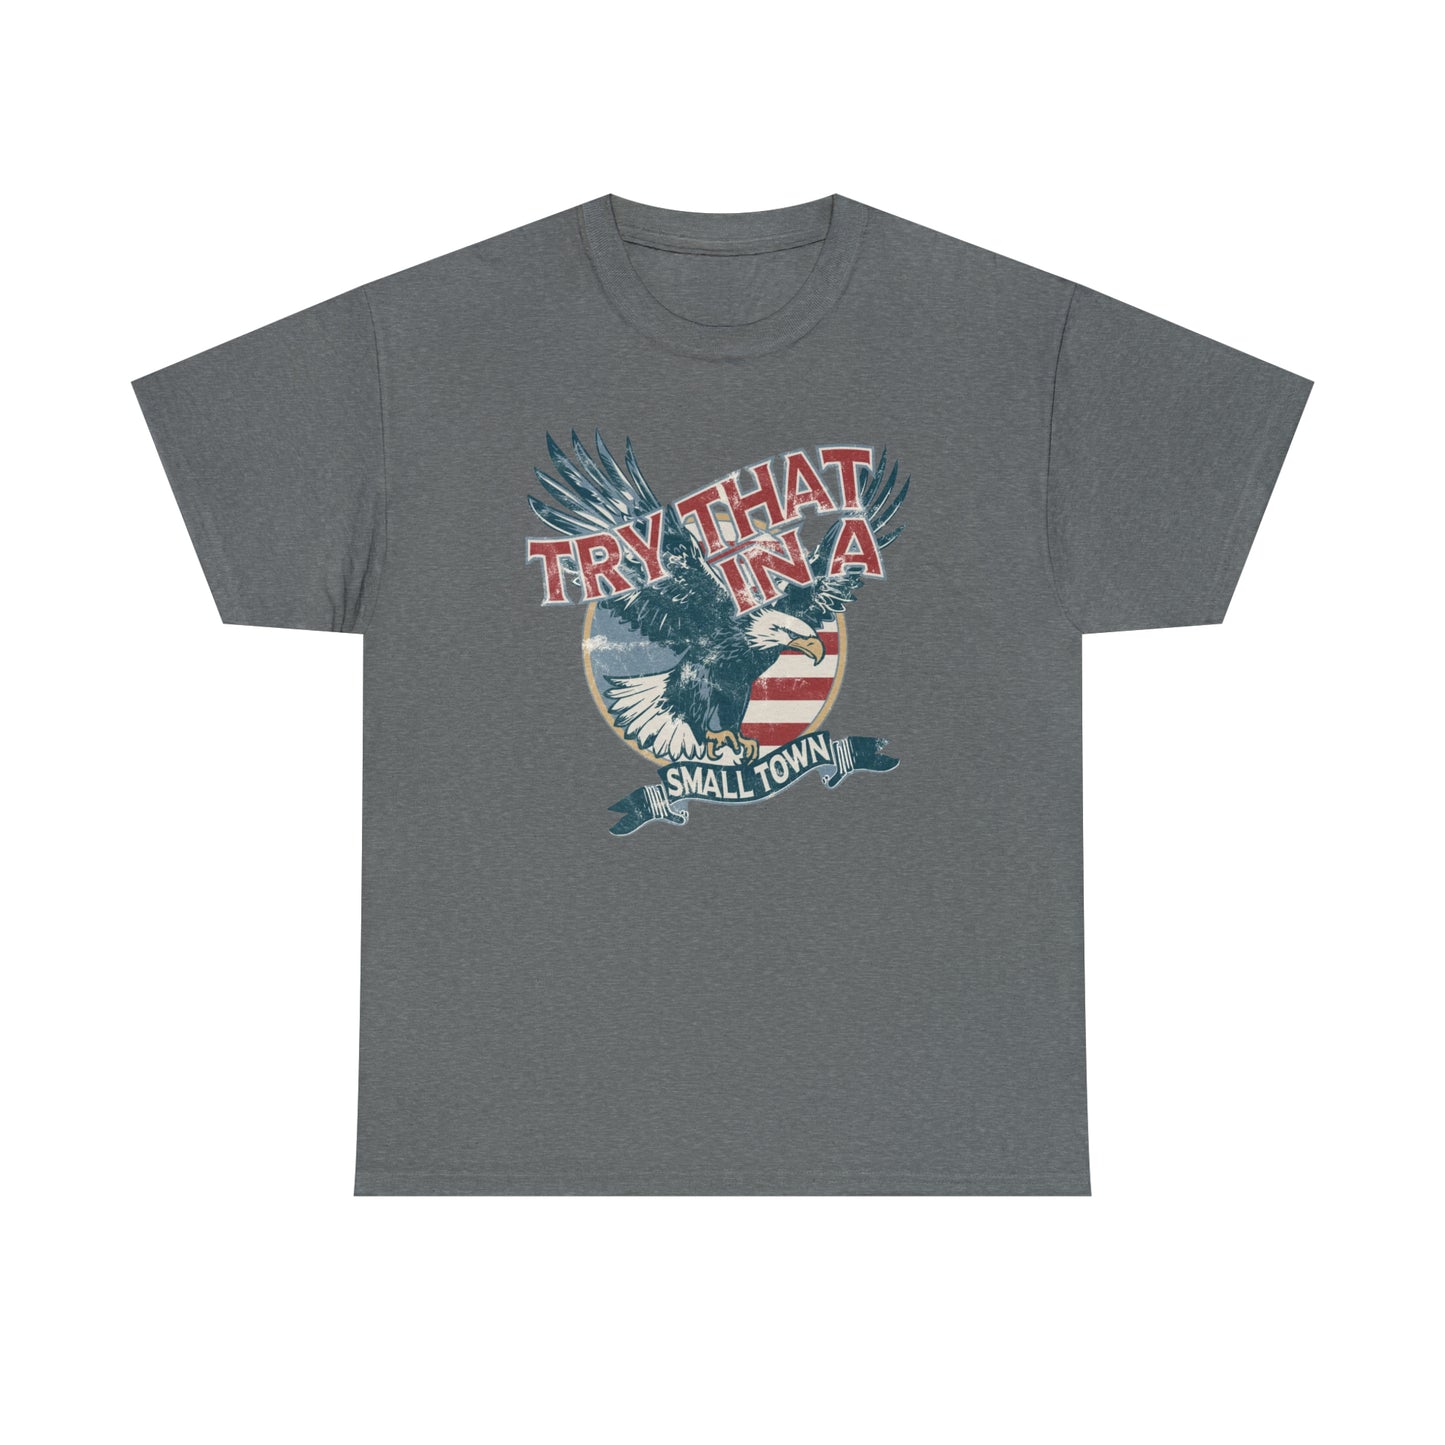 Try that in a small town Eagle Unisex Heavy Cotton Tee - Graphite Heather / S - Graphite Heather / M - Graphite Heather / L - Graphite Heather / XL - Graphite Heather / 2XL - Graphite Heather / 3XL - Graphite Heather / 4XL - Graphite Heather / 5XL